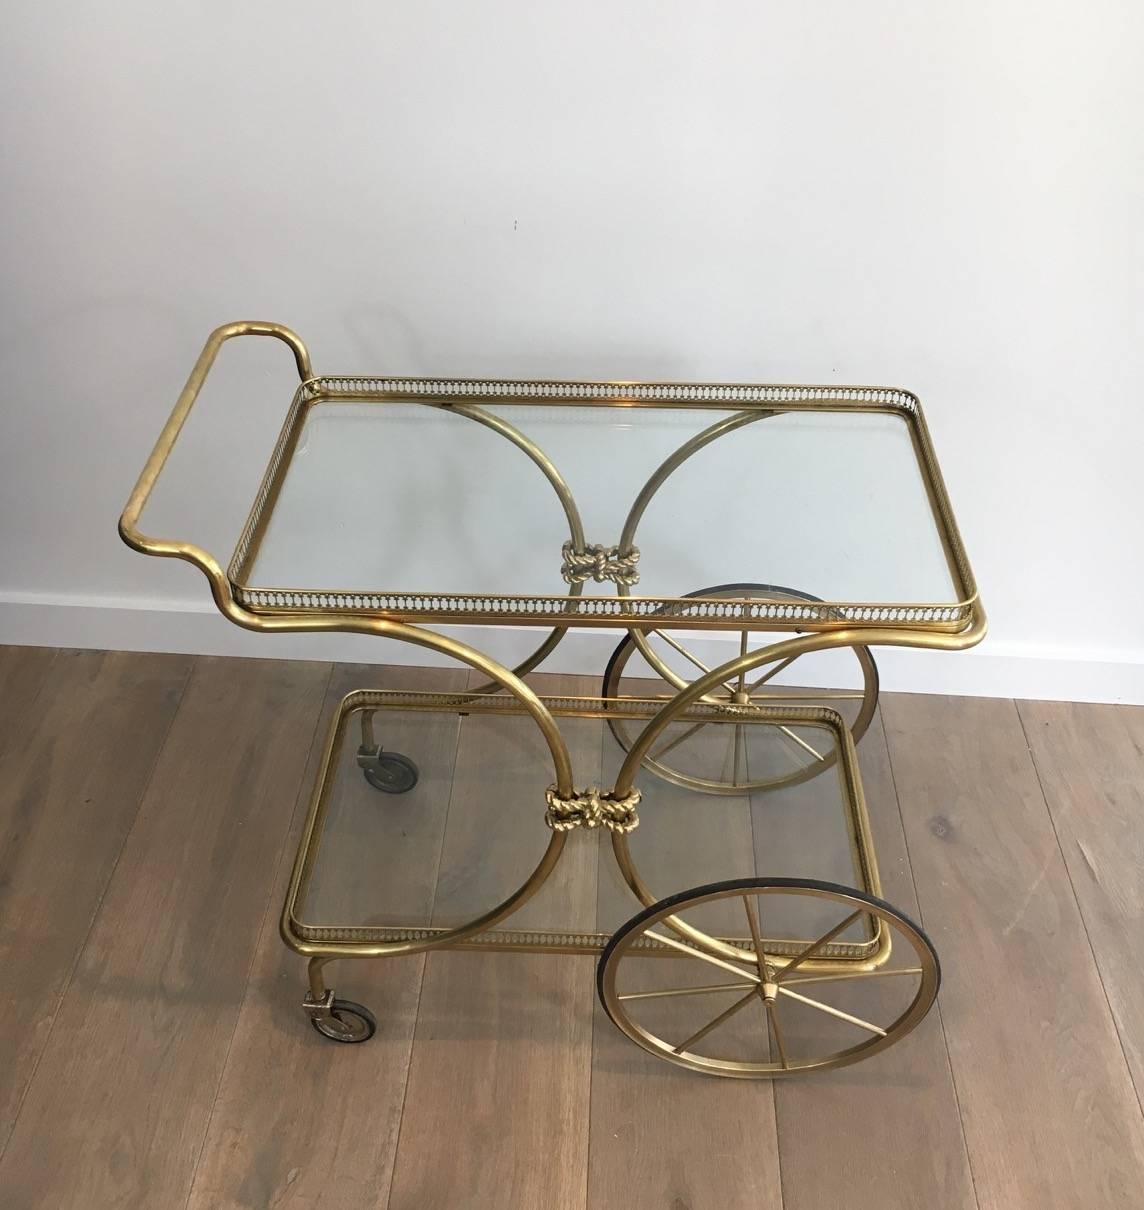 French brass bar cart by Maison Baguès with removable trays, circa 1940s

This piece is currently in France, please allow 4 to 6 weeks for delivery.